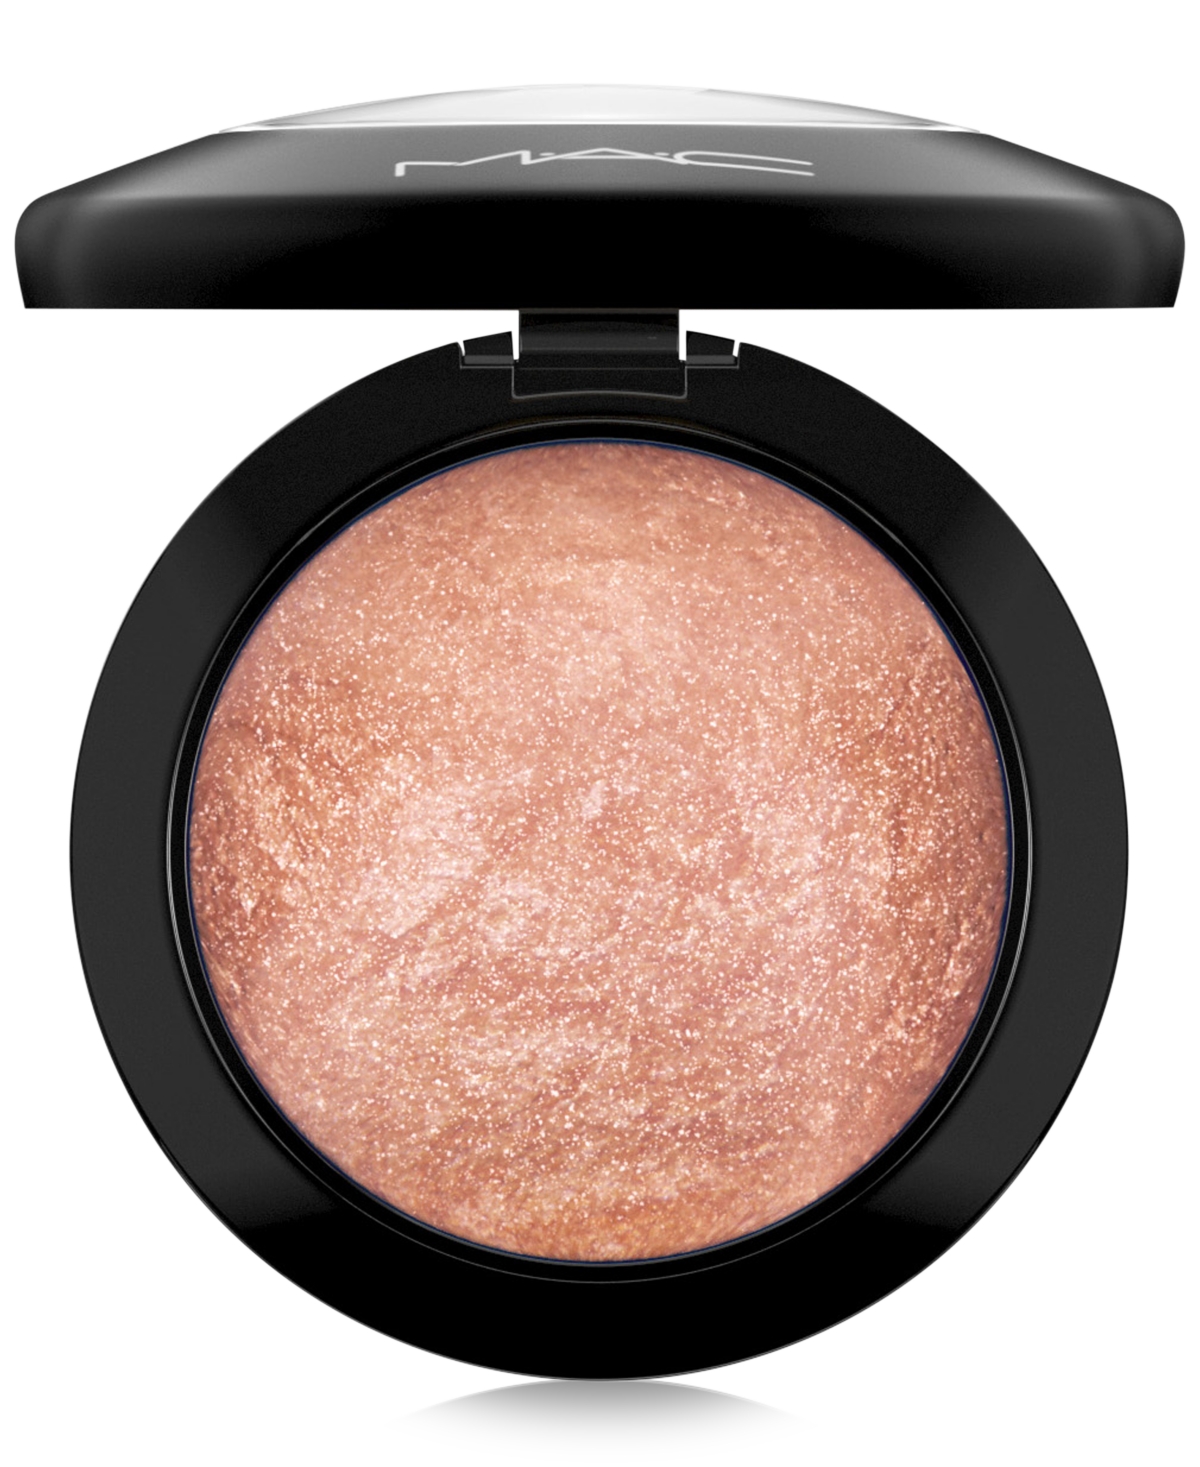 Mac Mineralize Skinfinish Highlighter In Cheeky Bronze